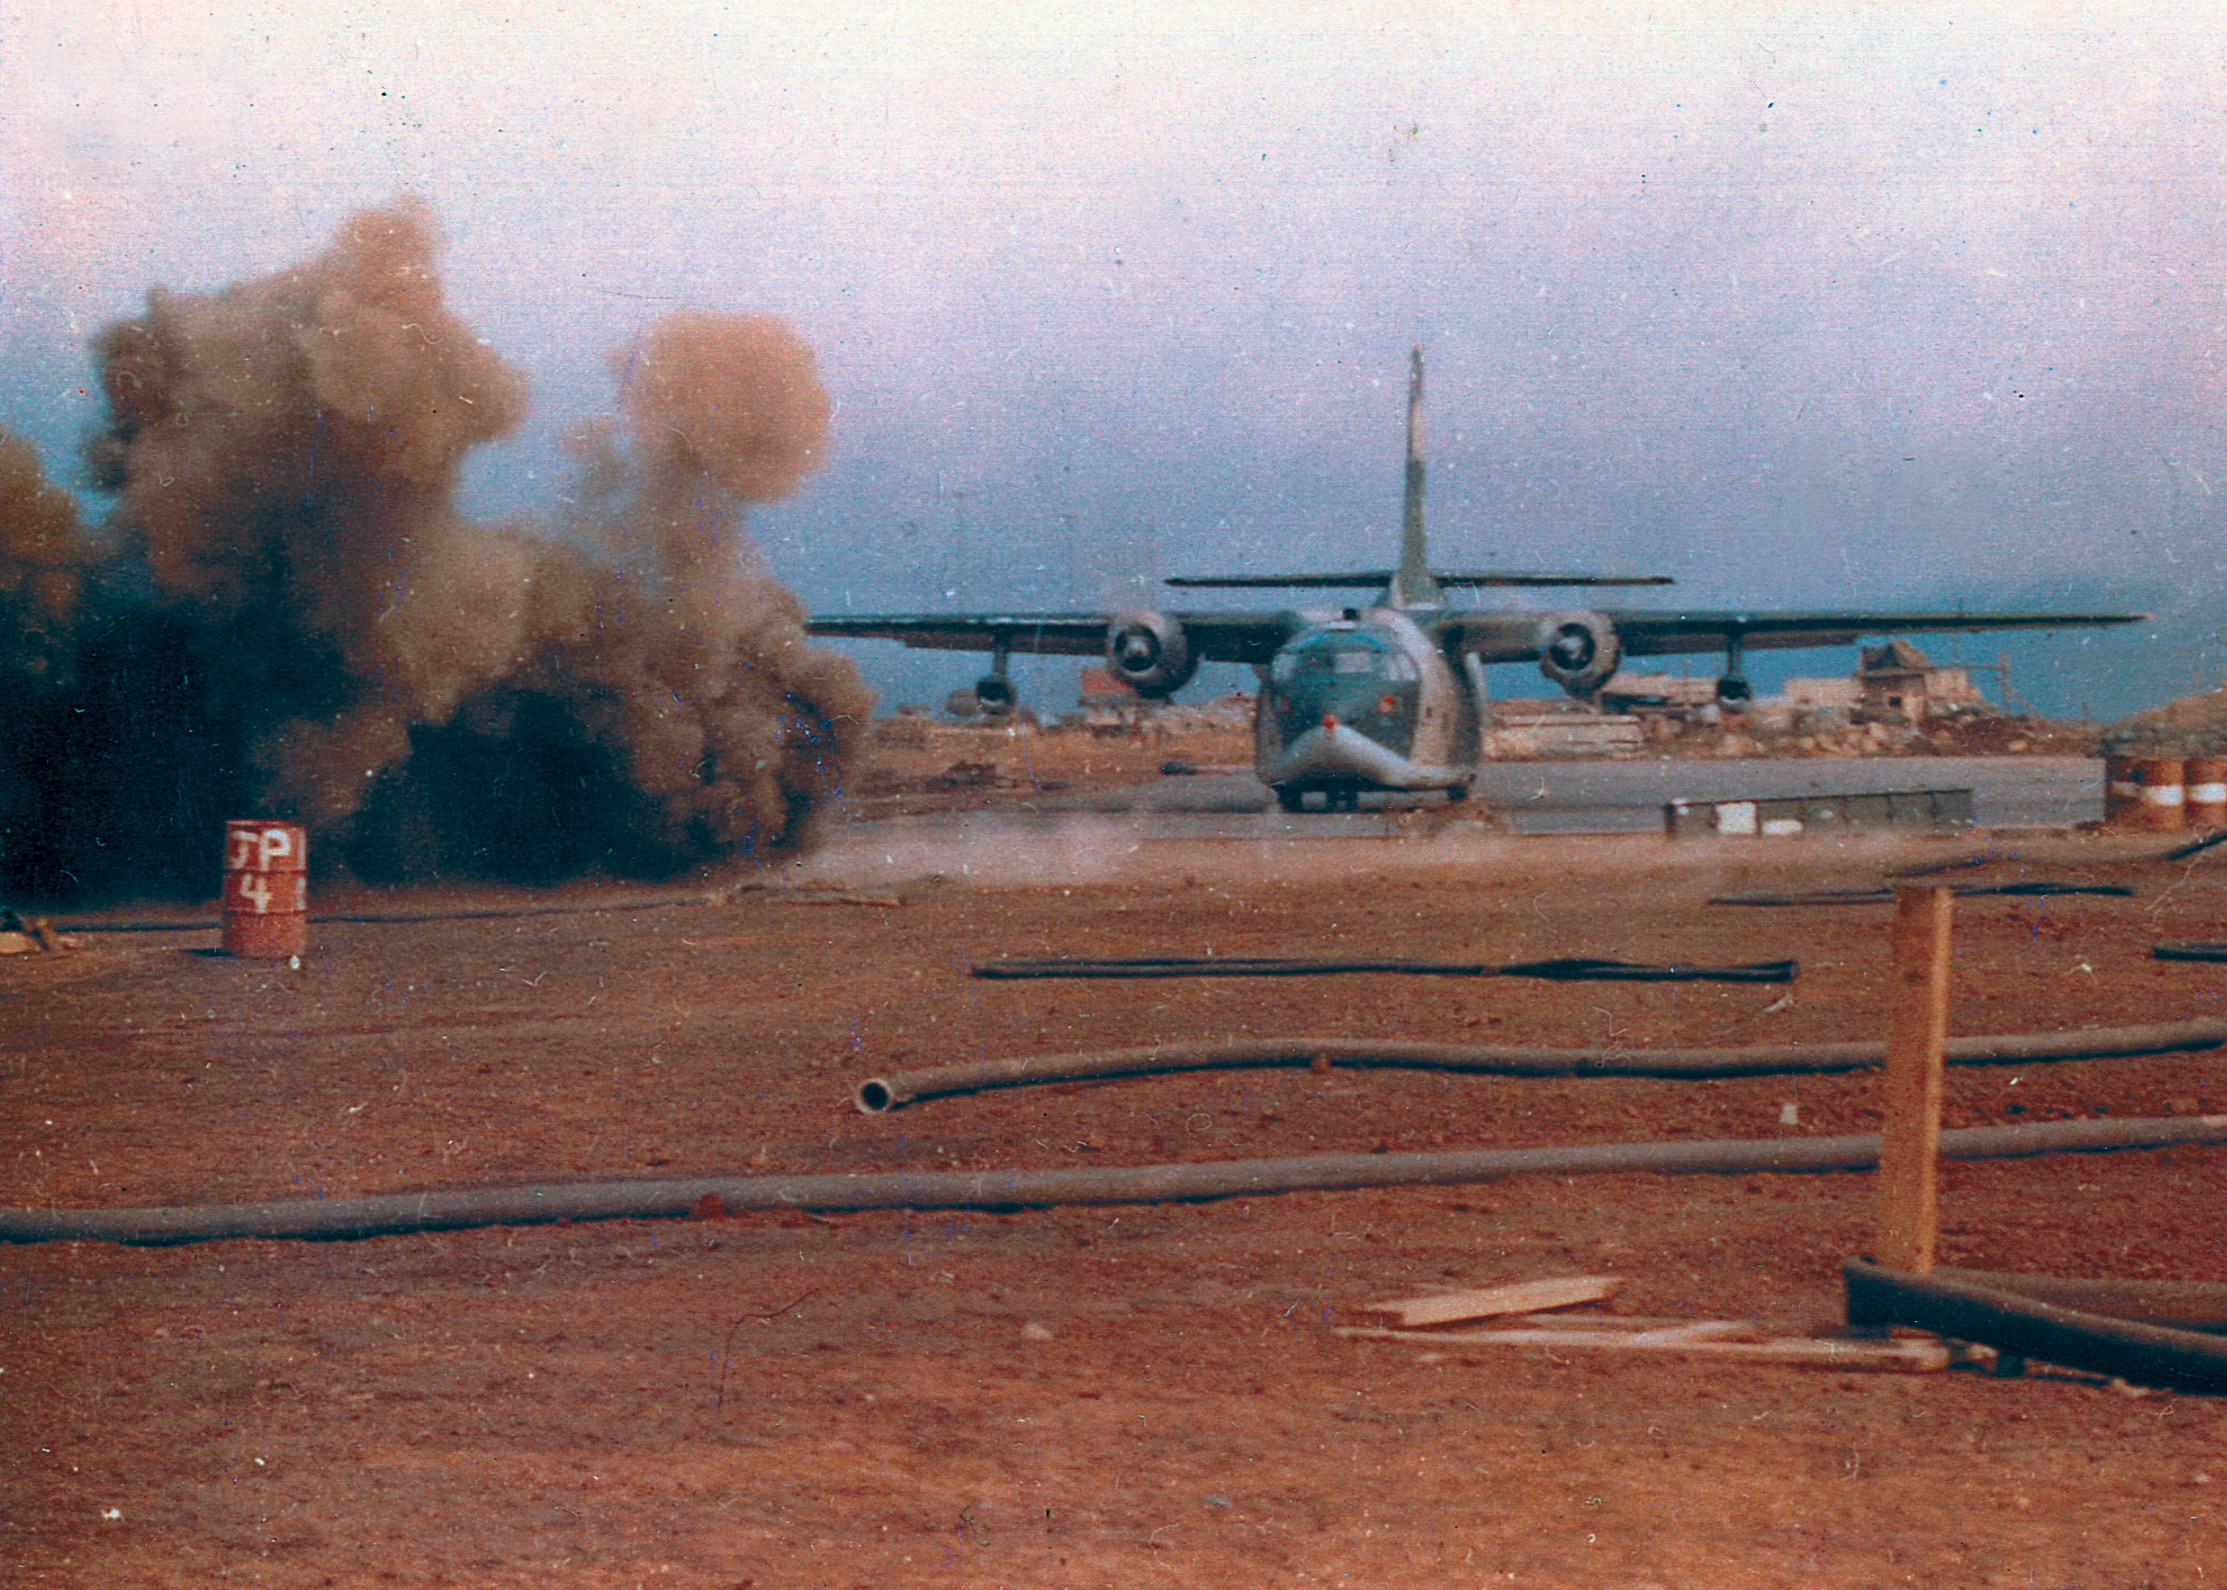 Landing under enemy fire, an American C-123 touches down unscathed at Khe Sanh.